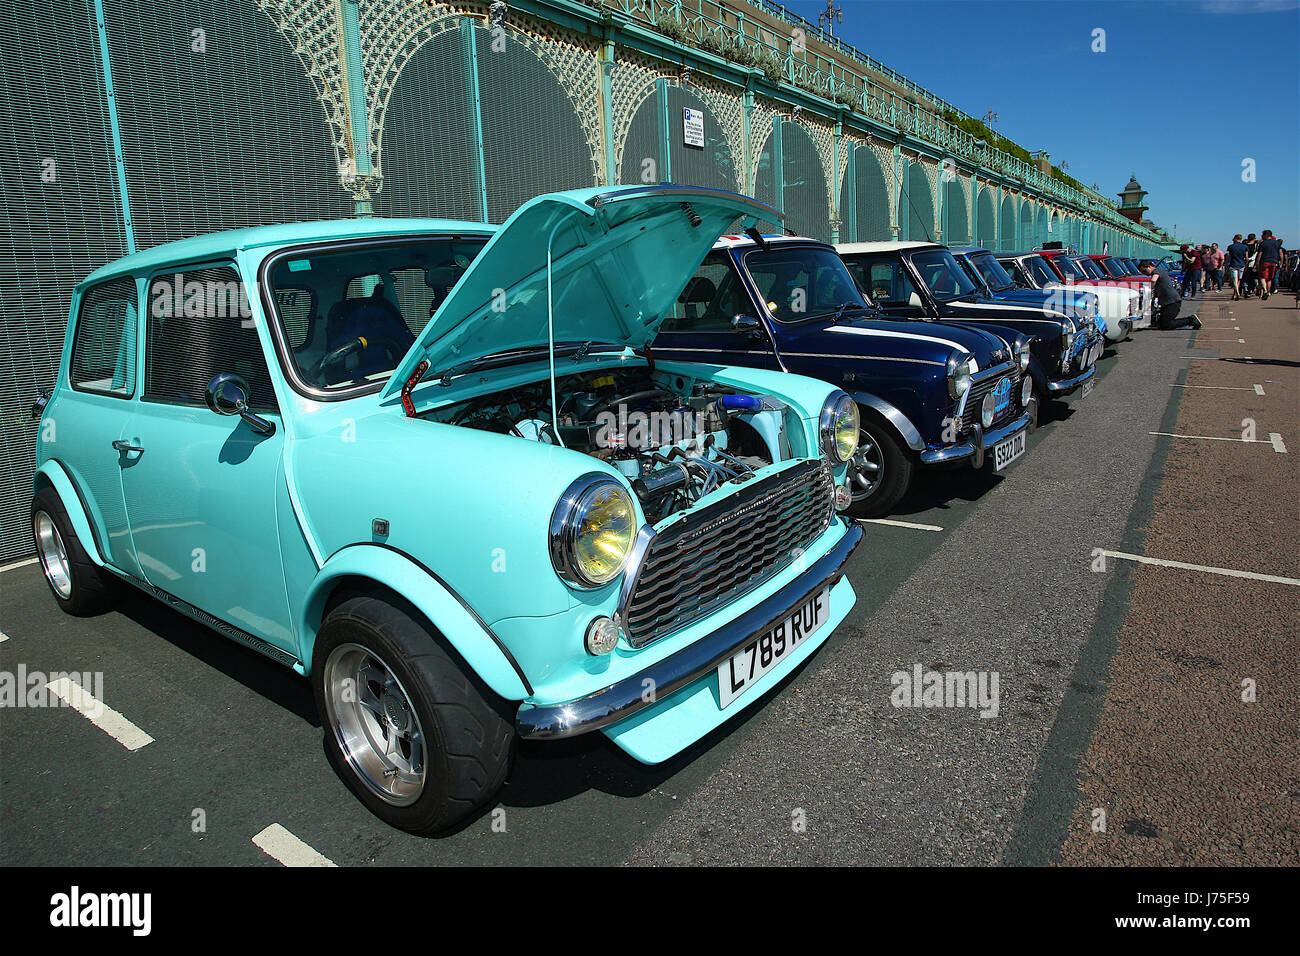 Mini car London to Brighton event where thousands of mini cars travel form Crystal Palace to Maderia Drive on Brighton Beach Stock Photo